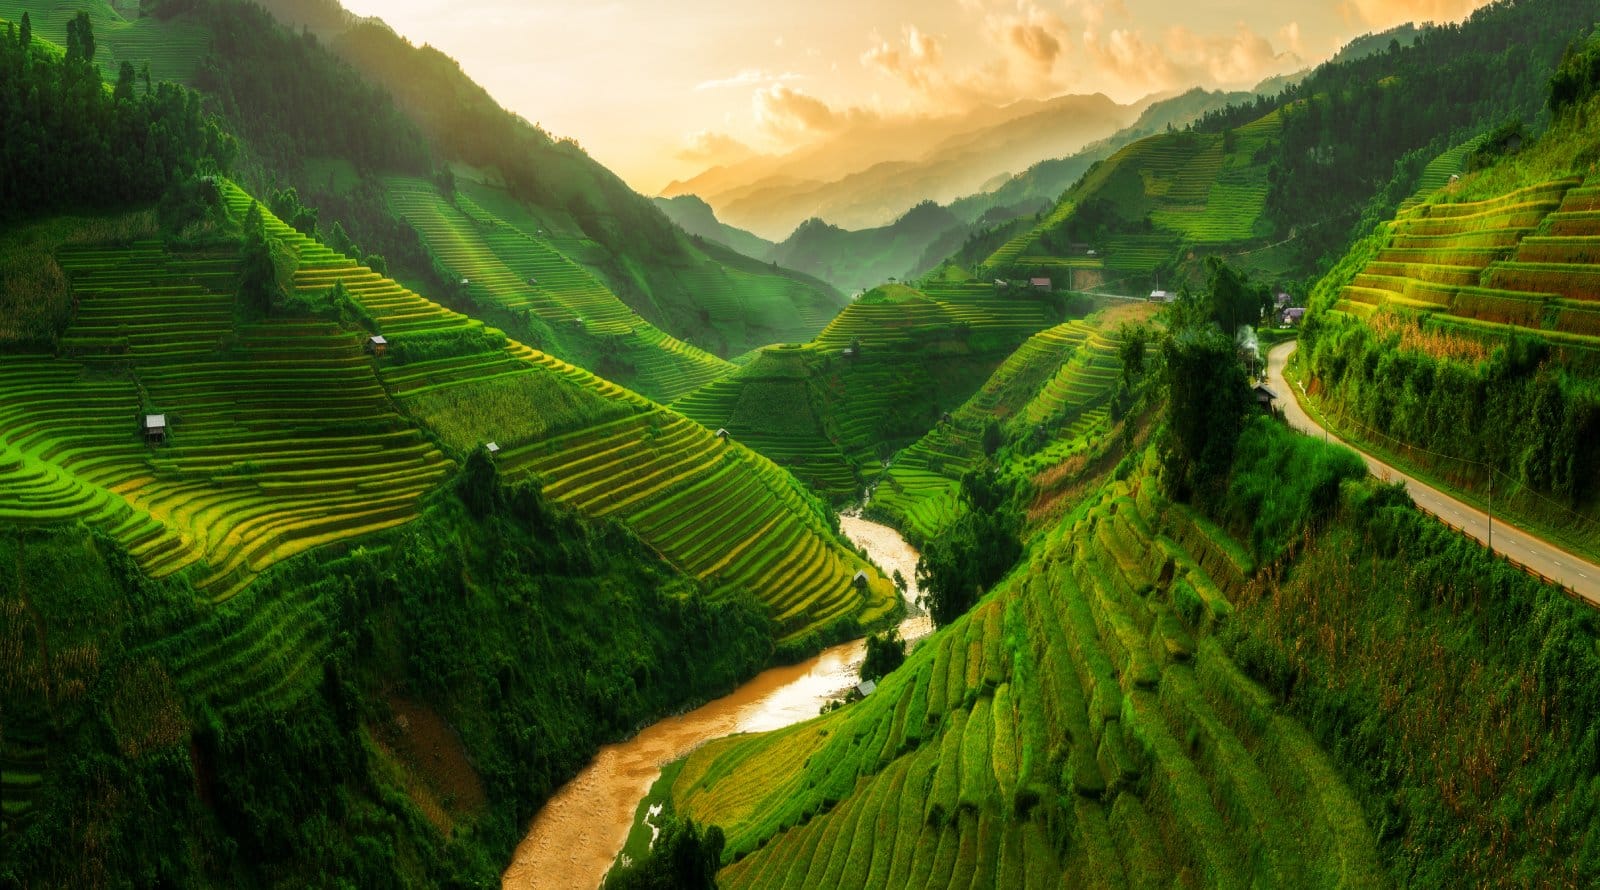 <p class="wp-caption-text">Image Credit: Shutterstock / Summit Art Creations</p>  <p><span>Nestled in the northern mountains of Vietnam, Sapa is a breathtaking destination known for its terraced rice fields, ethnic diversity, and rugged scenery. This area is home to several ethnic minority groups, each with their unique traditions and lifestyles. Trekking through the rice terraces to visit remote villages offers an intimate glimpse into the daily lives of the local communities. The region’s highest peak, Fansipan, provides challenging treks and, on clear days, panoramic views of the surrounding mountains. Sapa’s market is bursting with colors and cultures, where you can find handcrafted textiles and sample local dishes.</span></p>